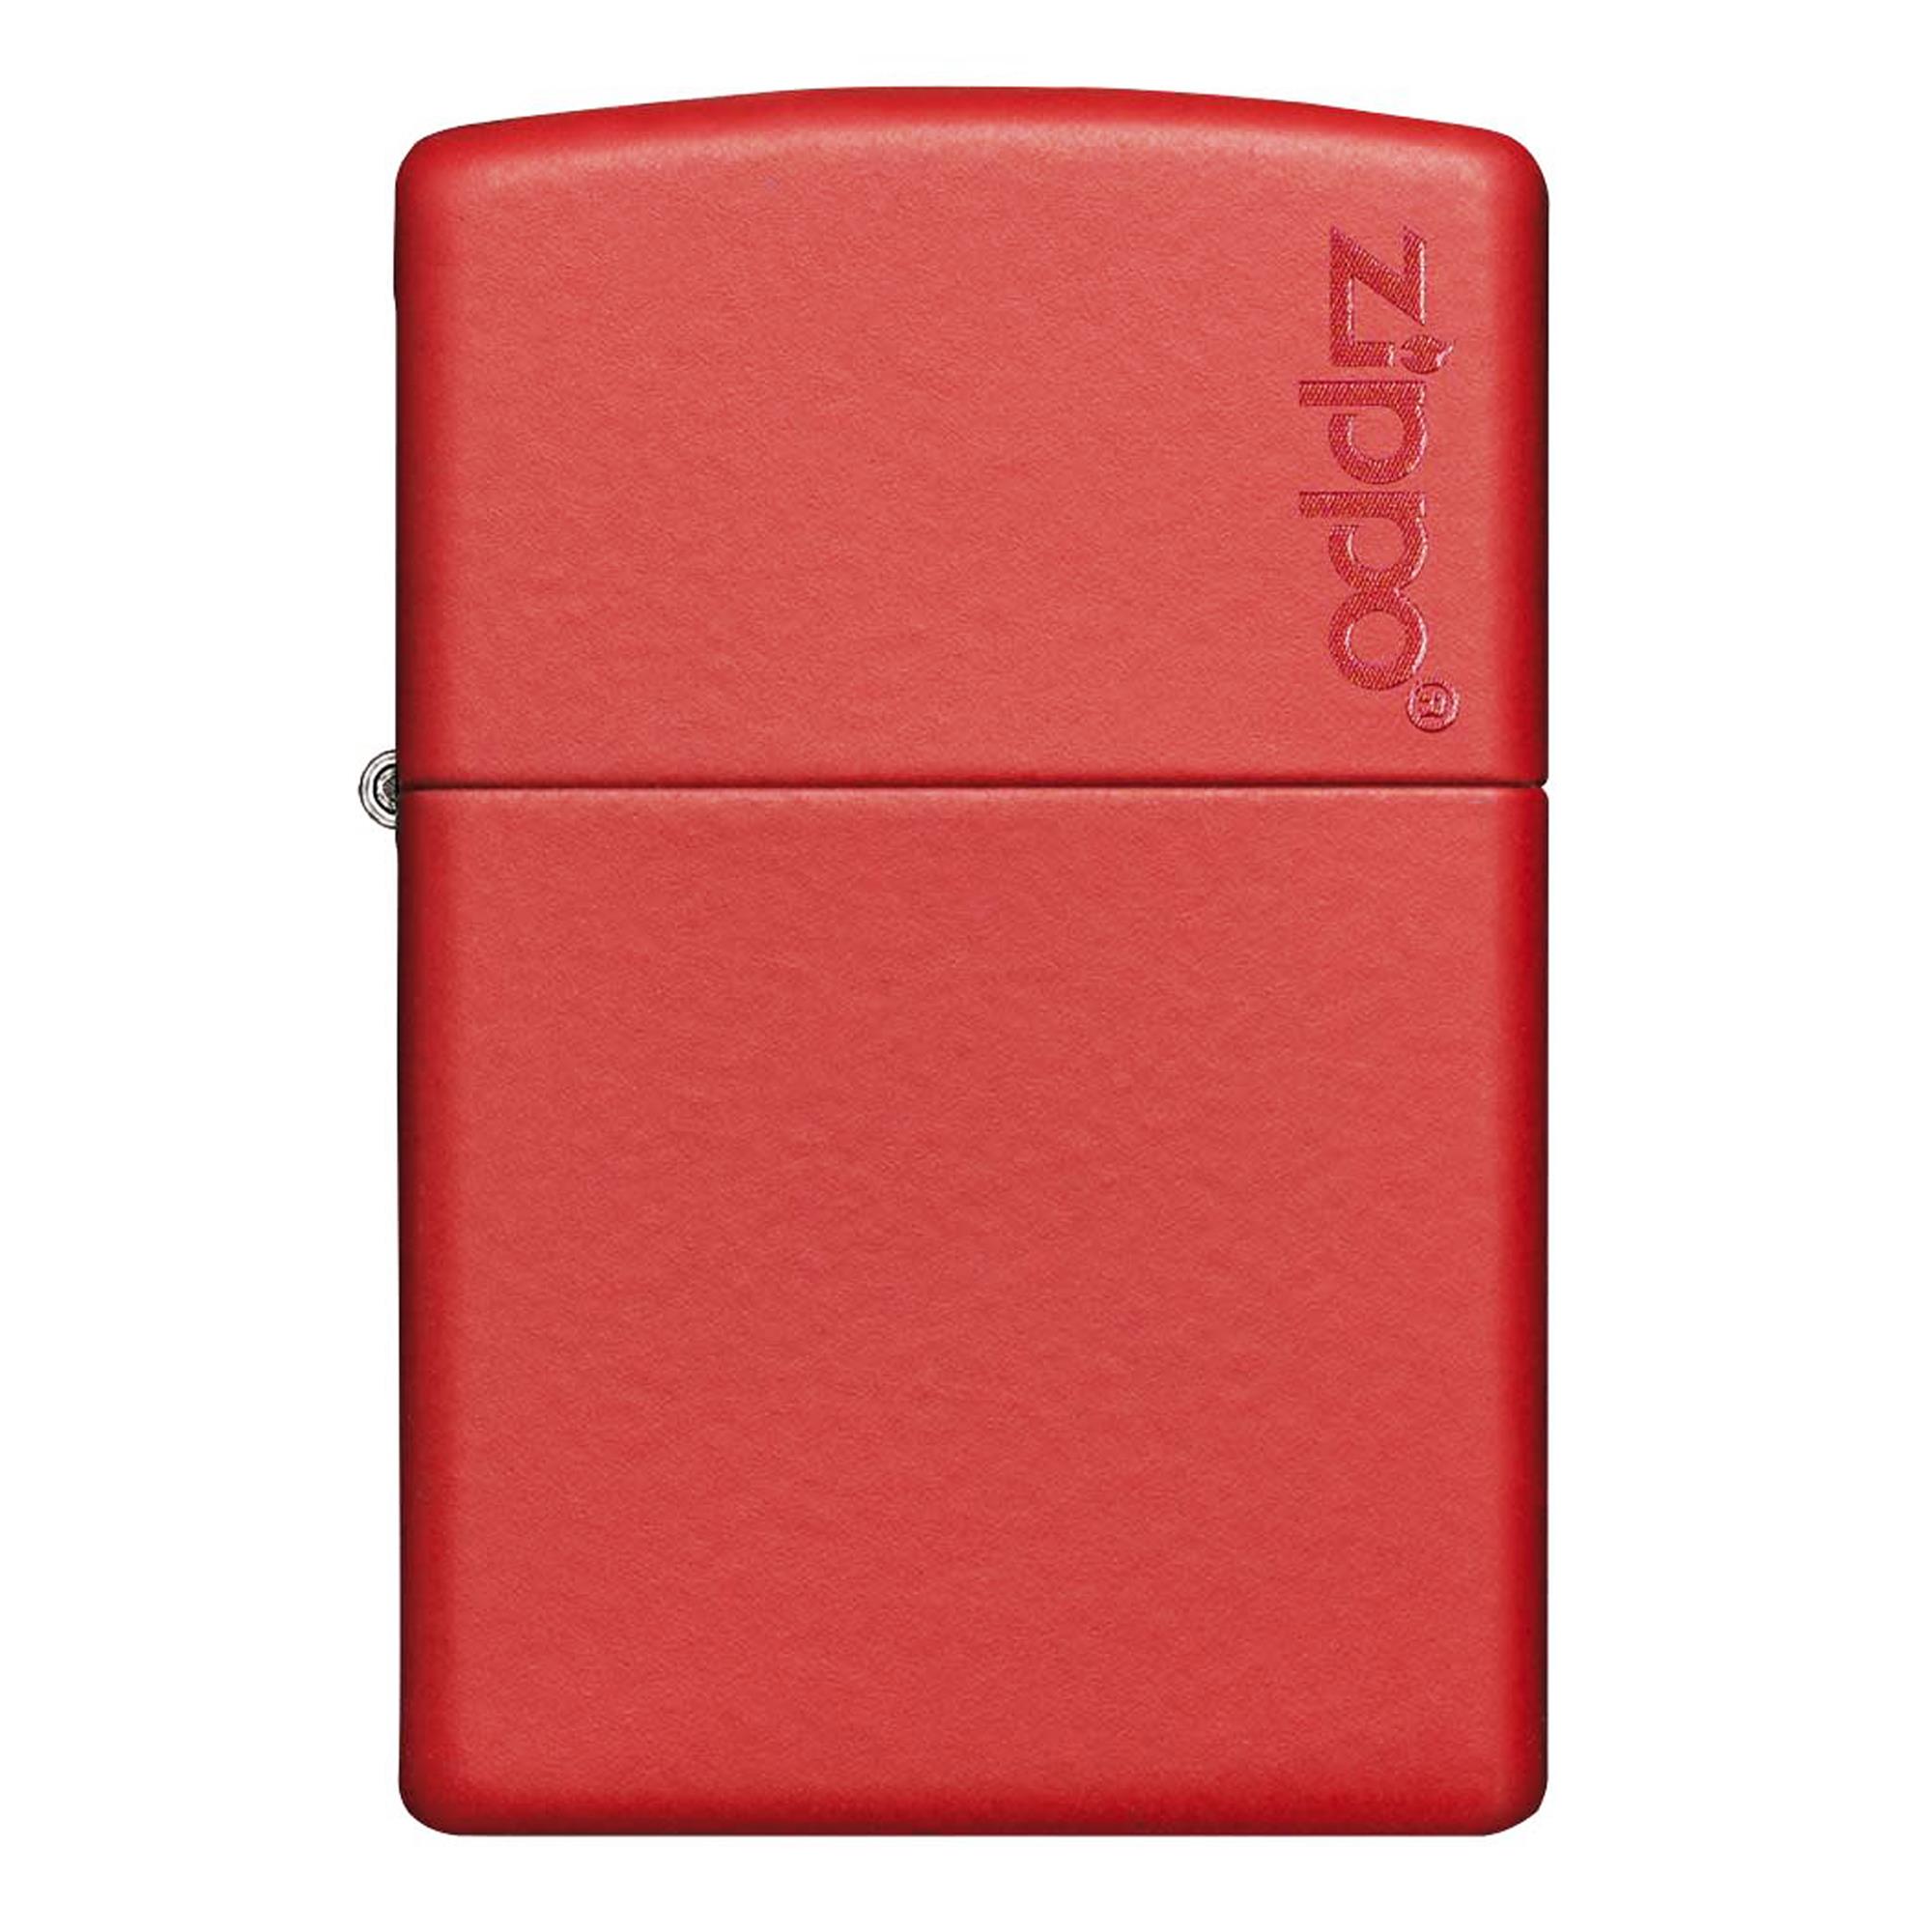 ZIPPO CLASSIC RED MATTE WITH LOGO